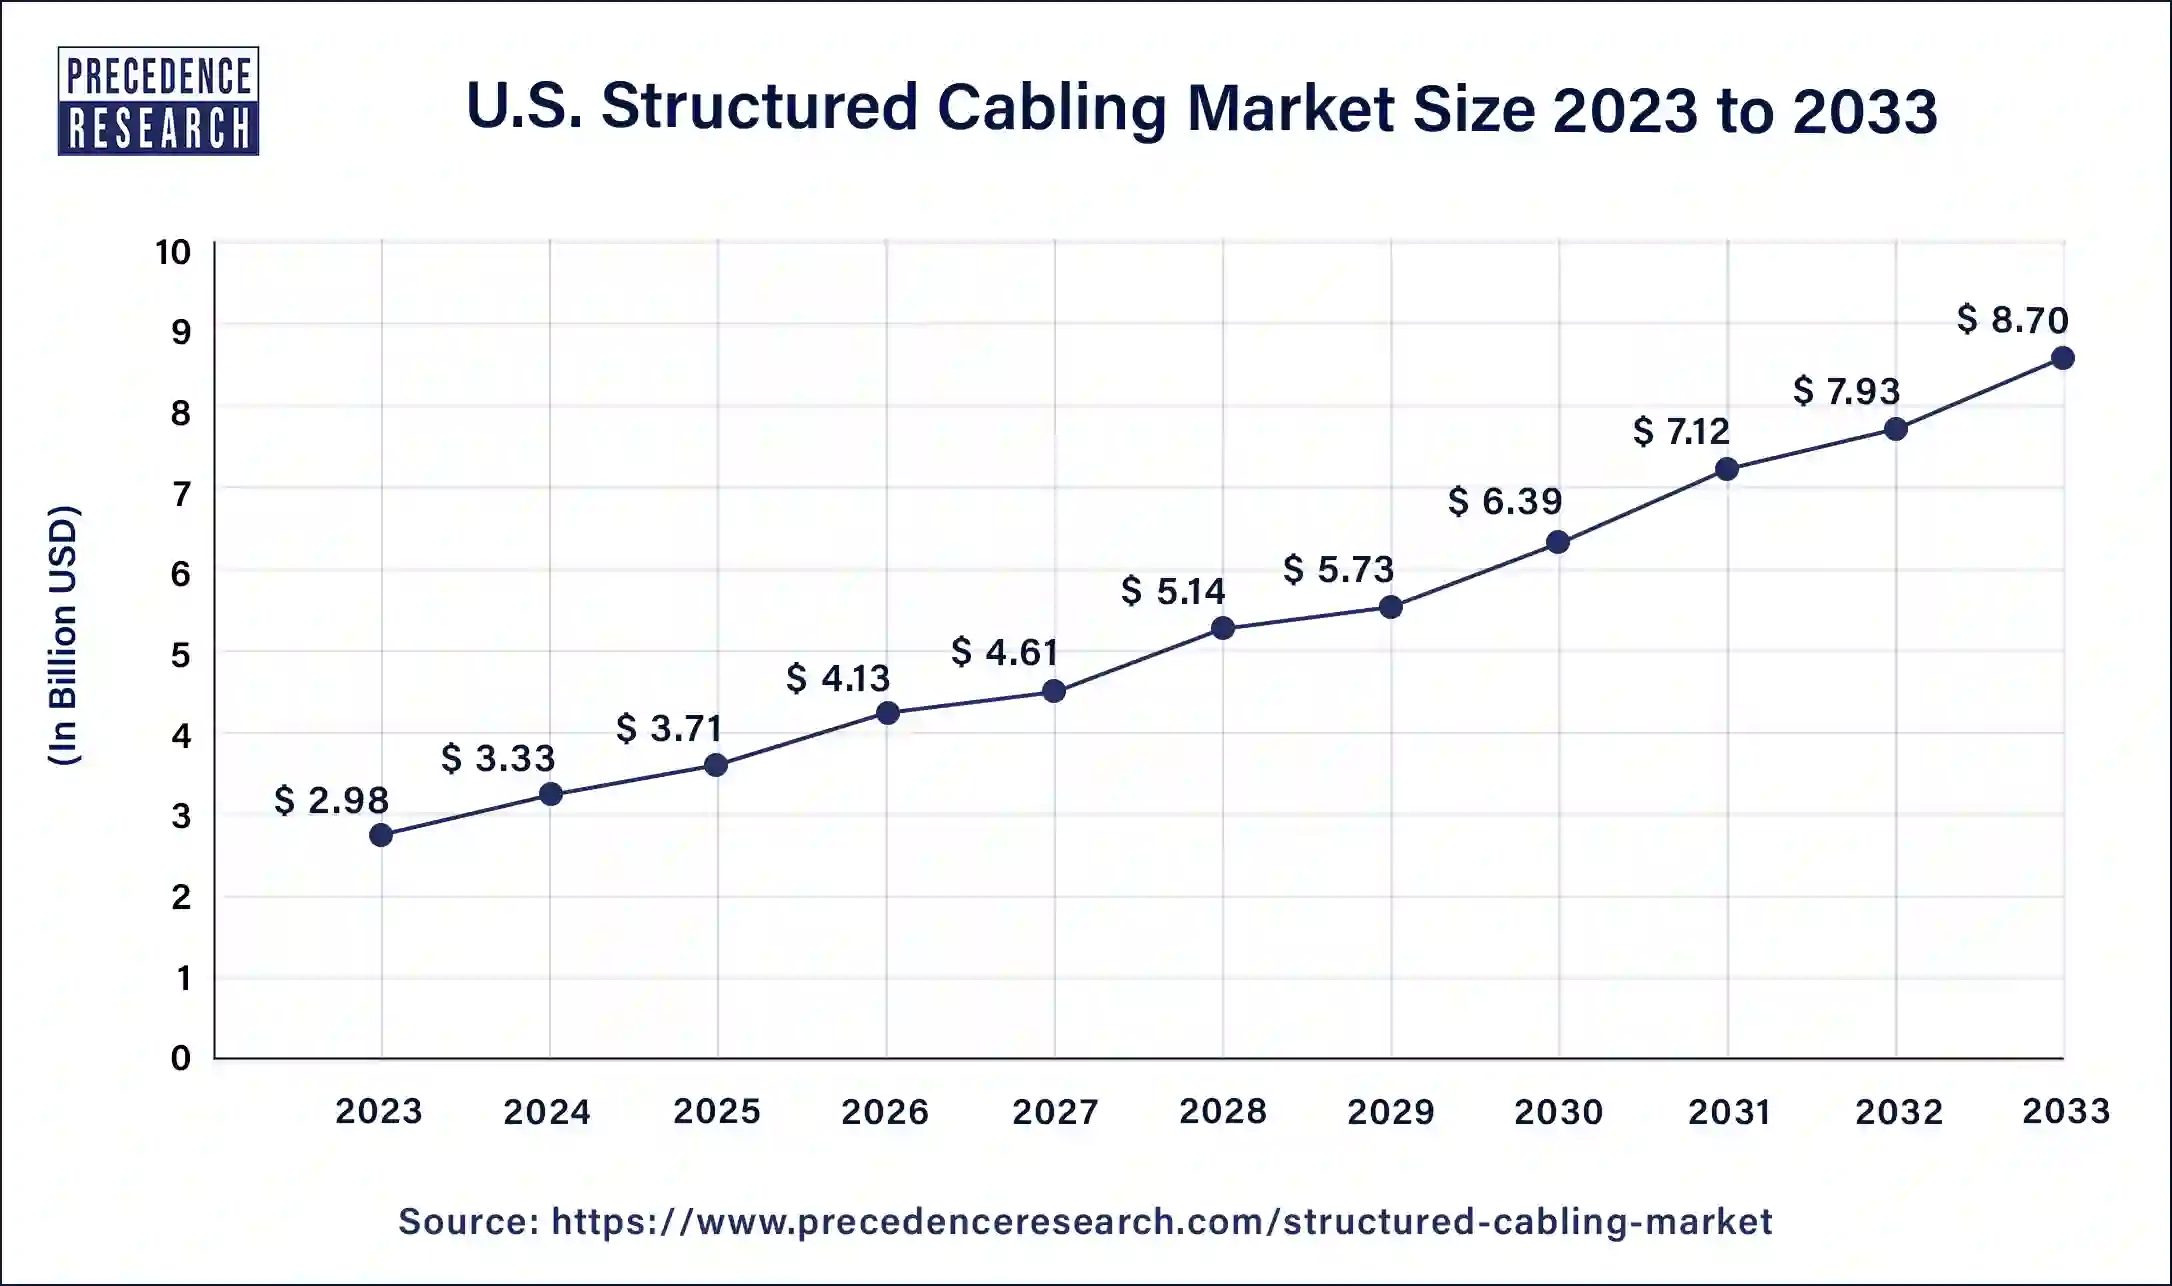 U.S. Structured Cabling Market Size 2024 to 2033